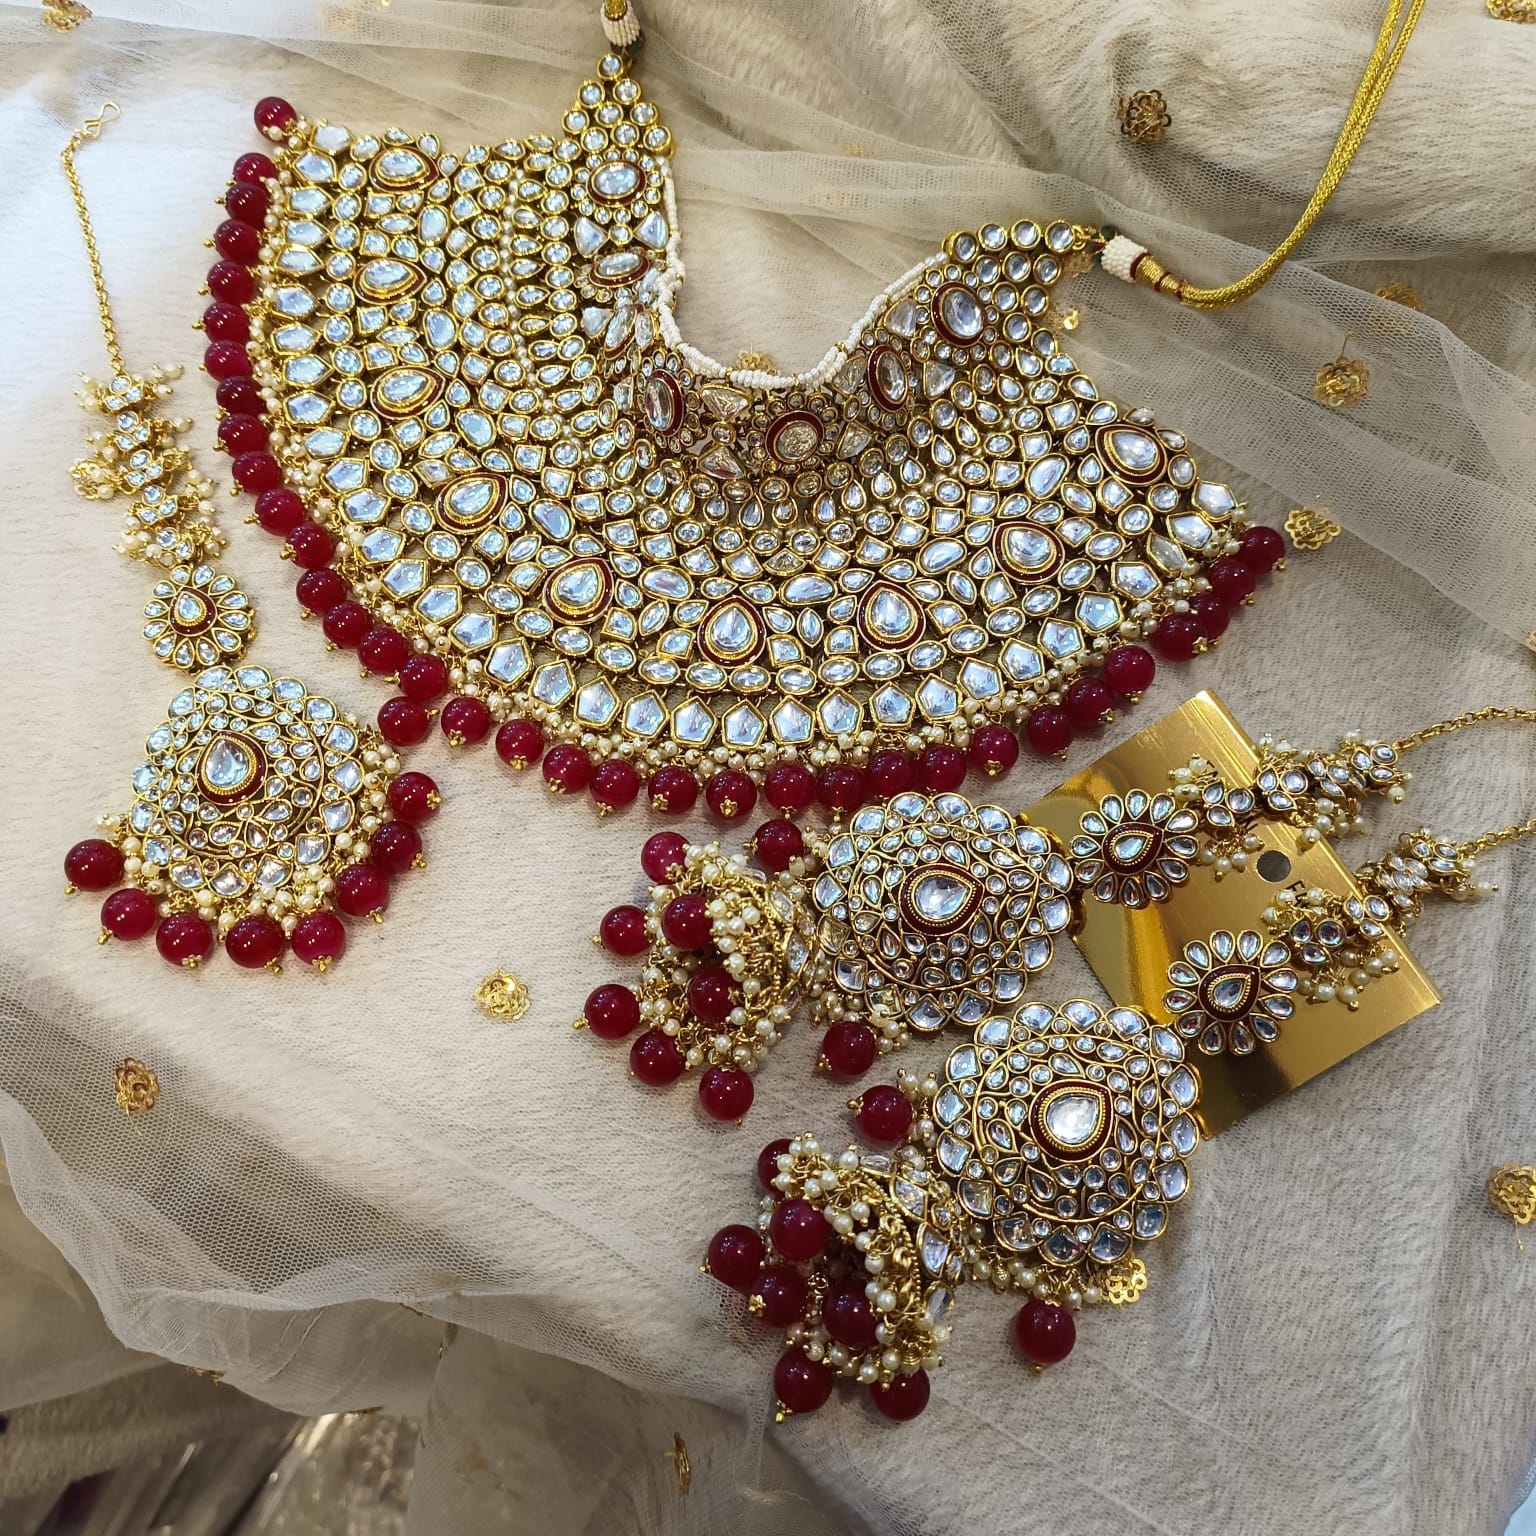 Indian Bridal Dresses: Buy Bridal Jewellery, Outfits & Accessories Online